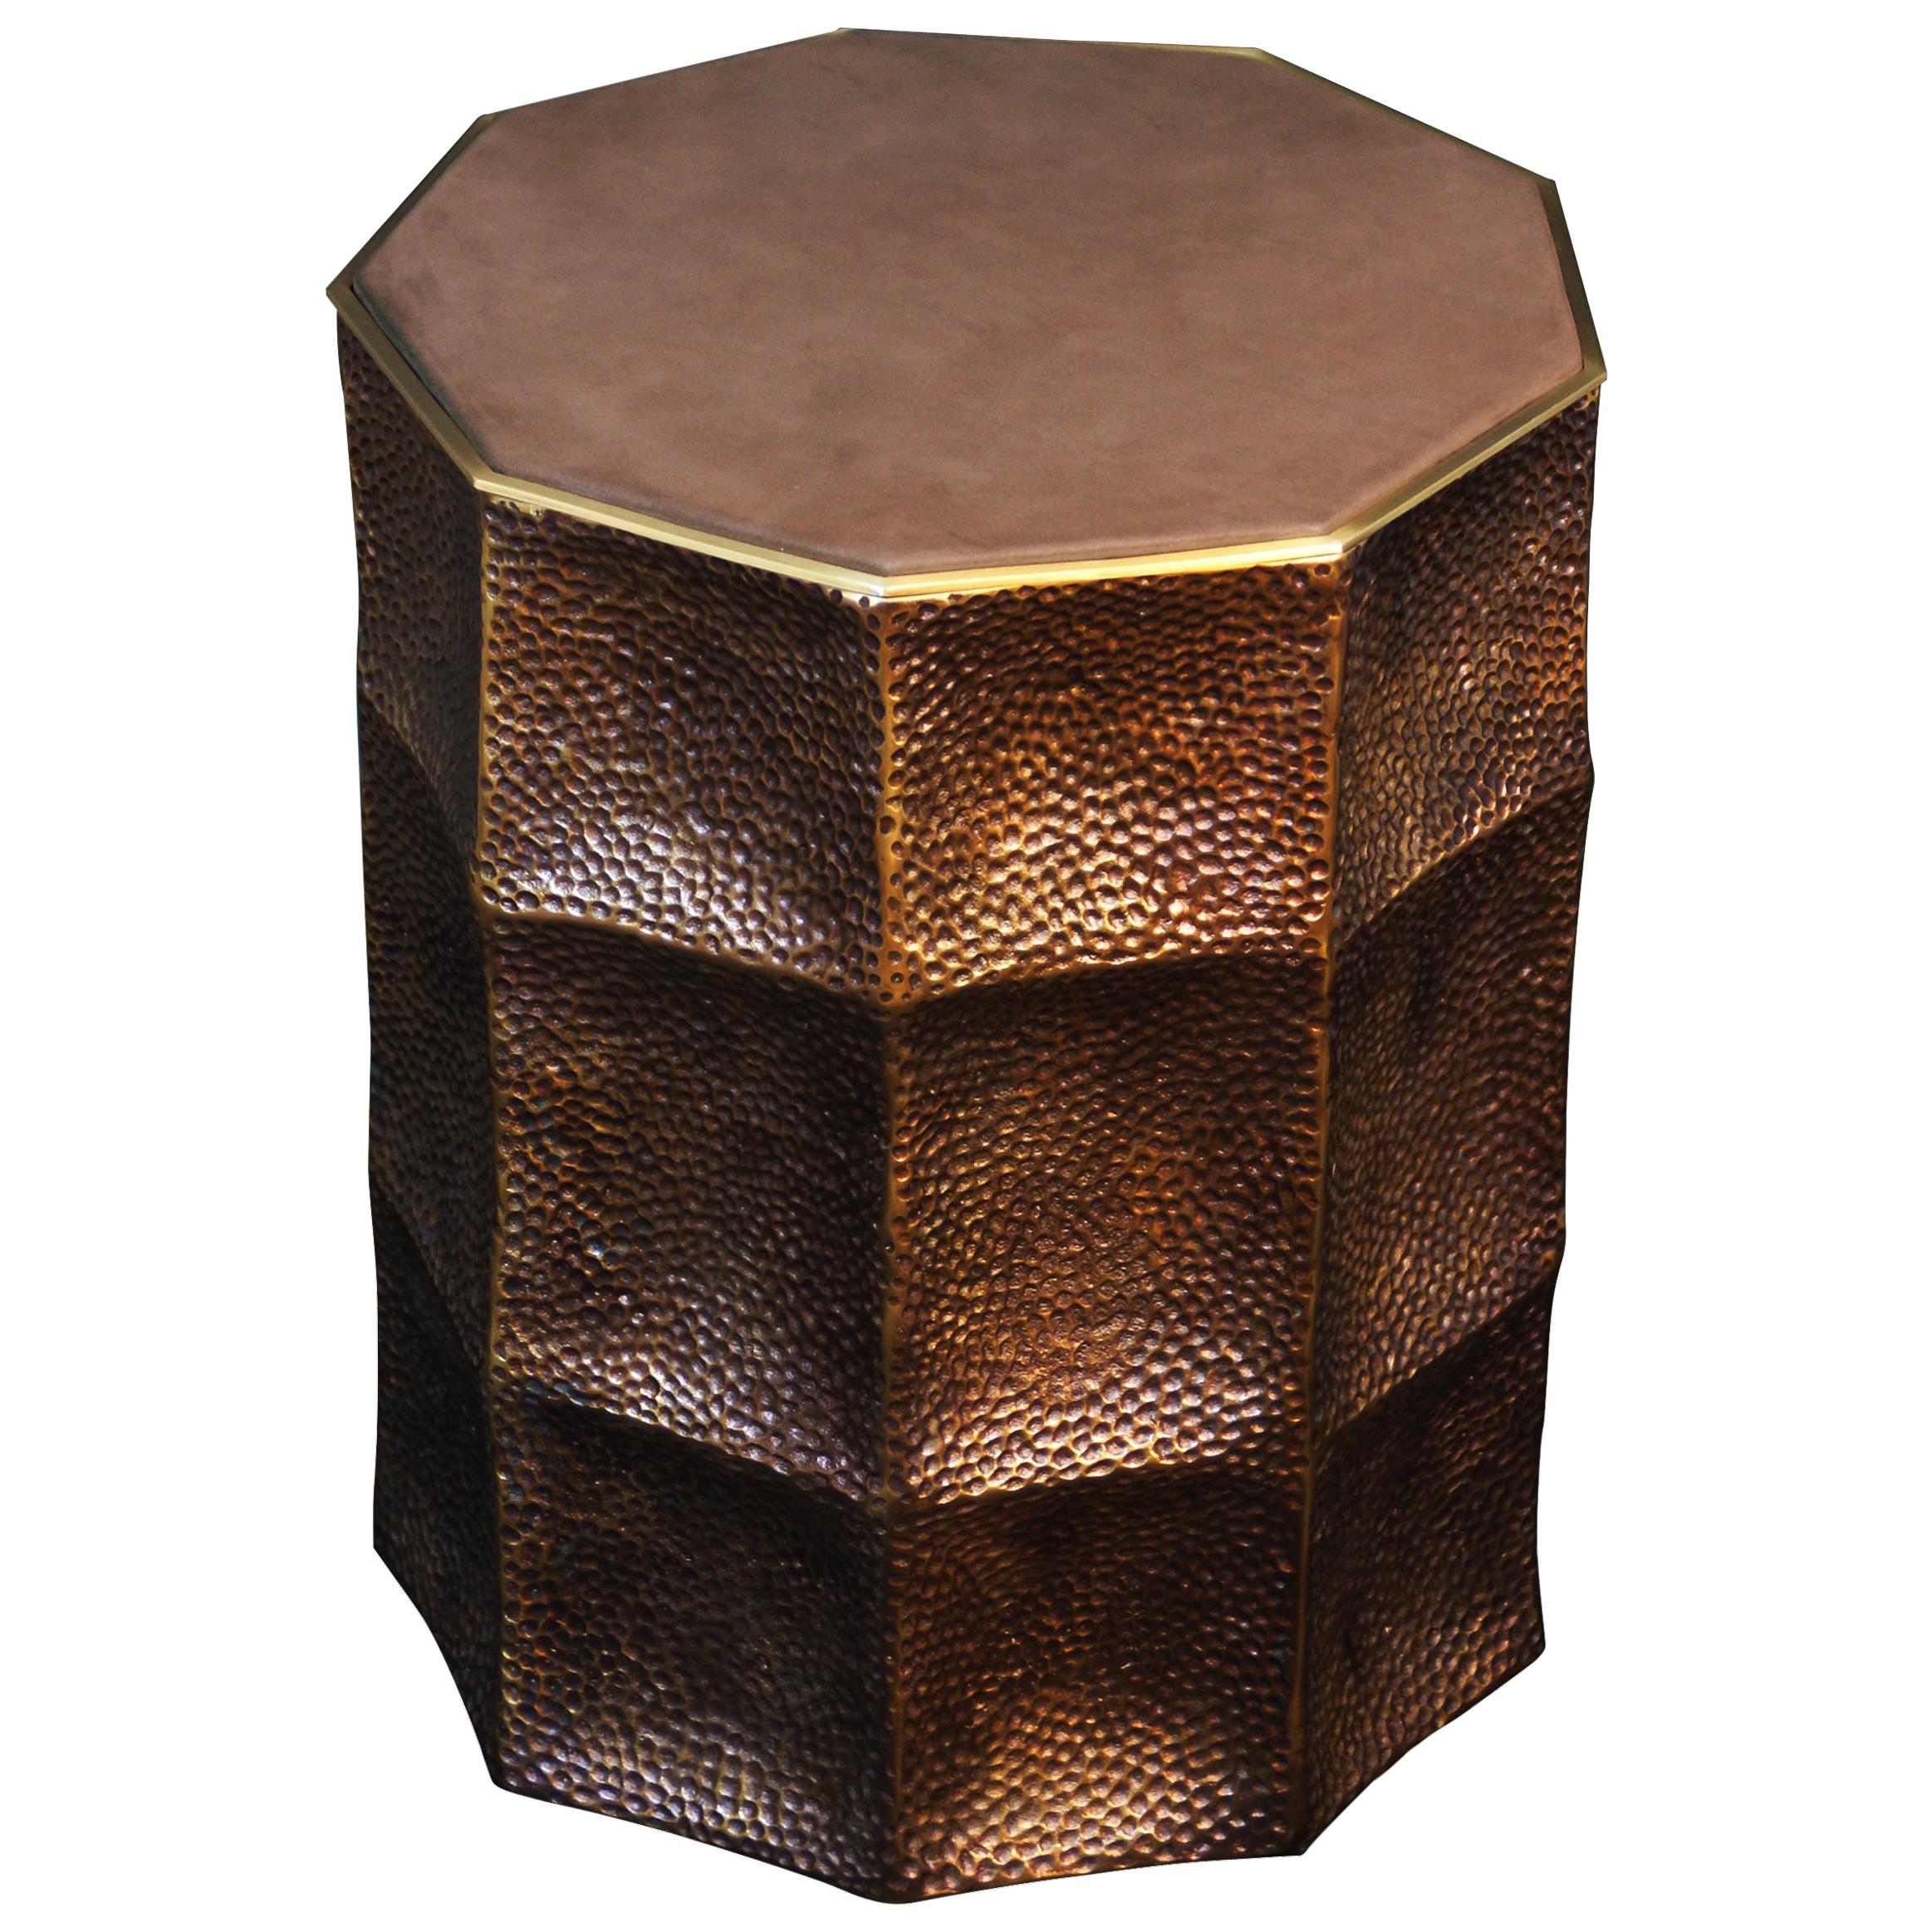 Designer's Coffee Table, Stool in Bronze and Brass, France, 2018